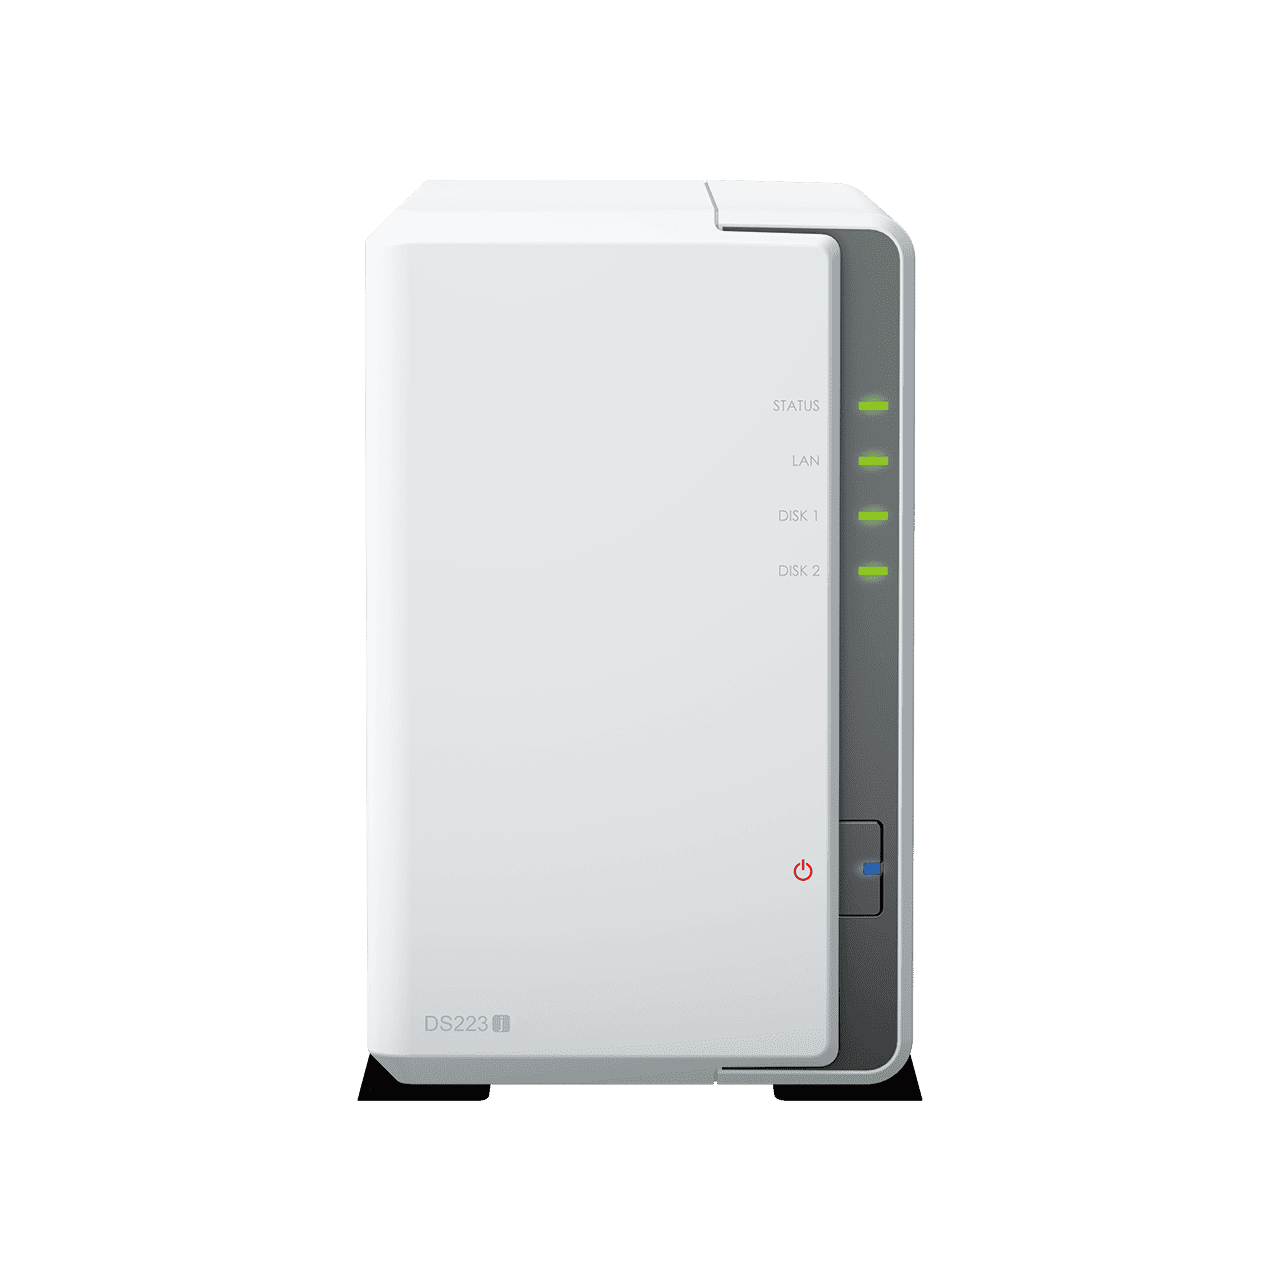 Synology releases first J-series NAS with support for Btrfs file system,  the DS223j - BWOne